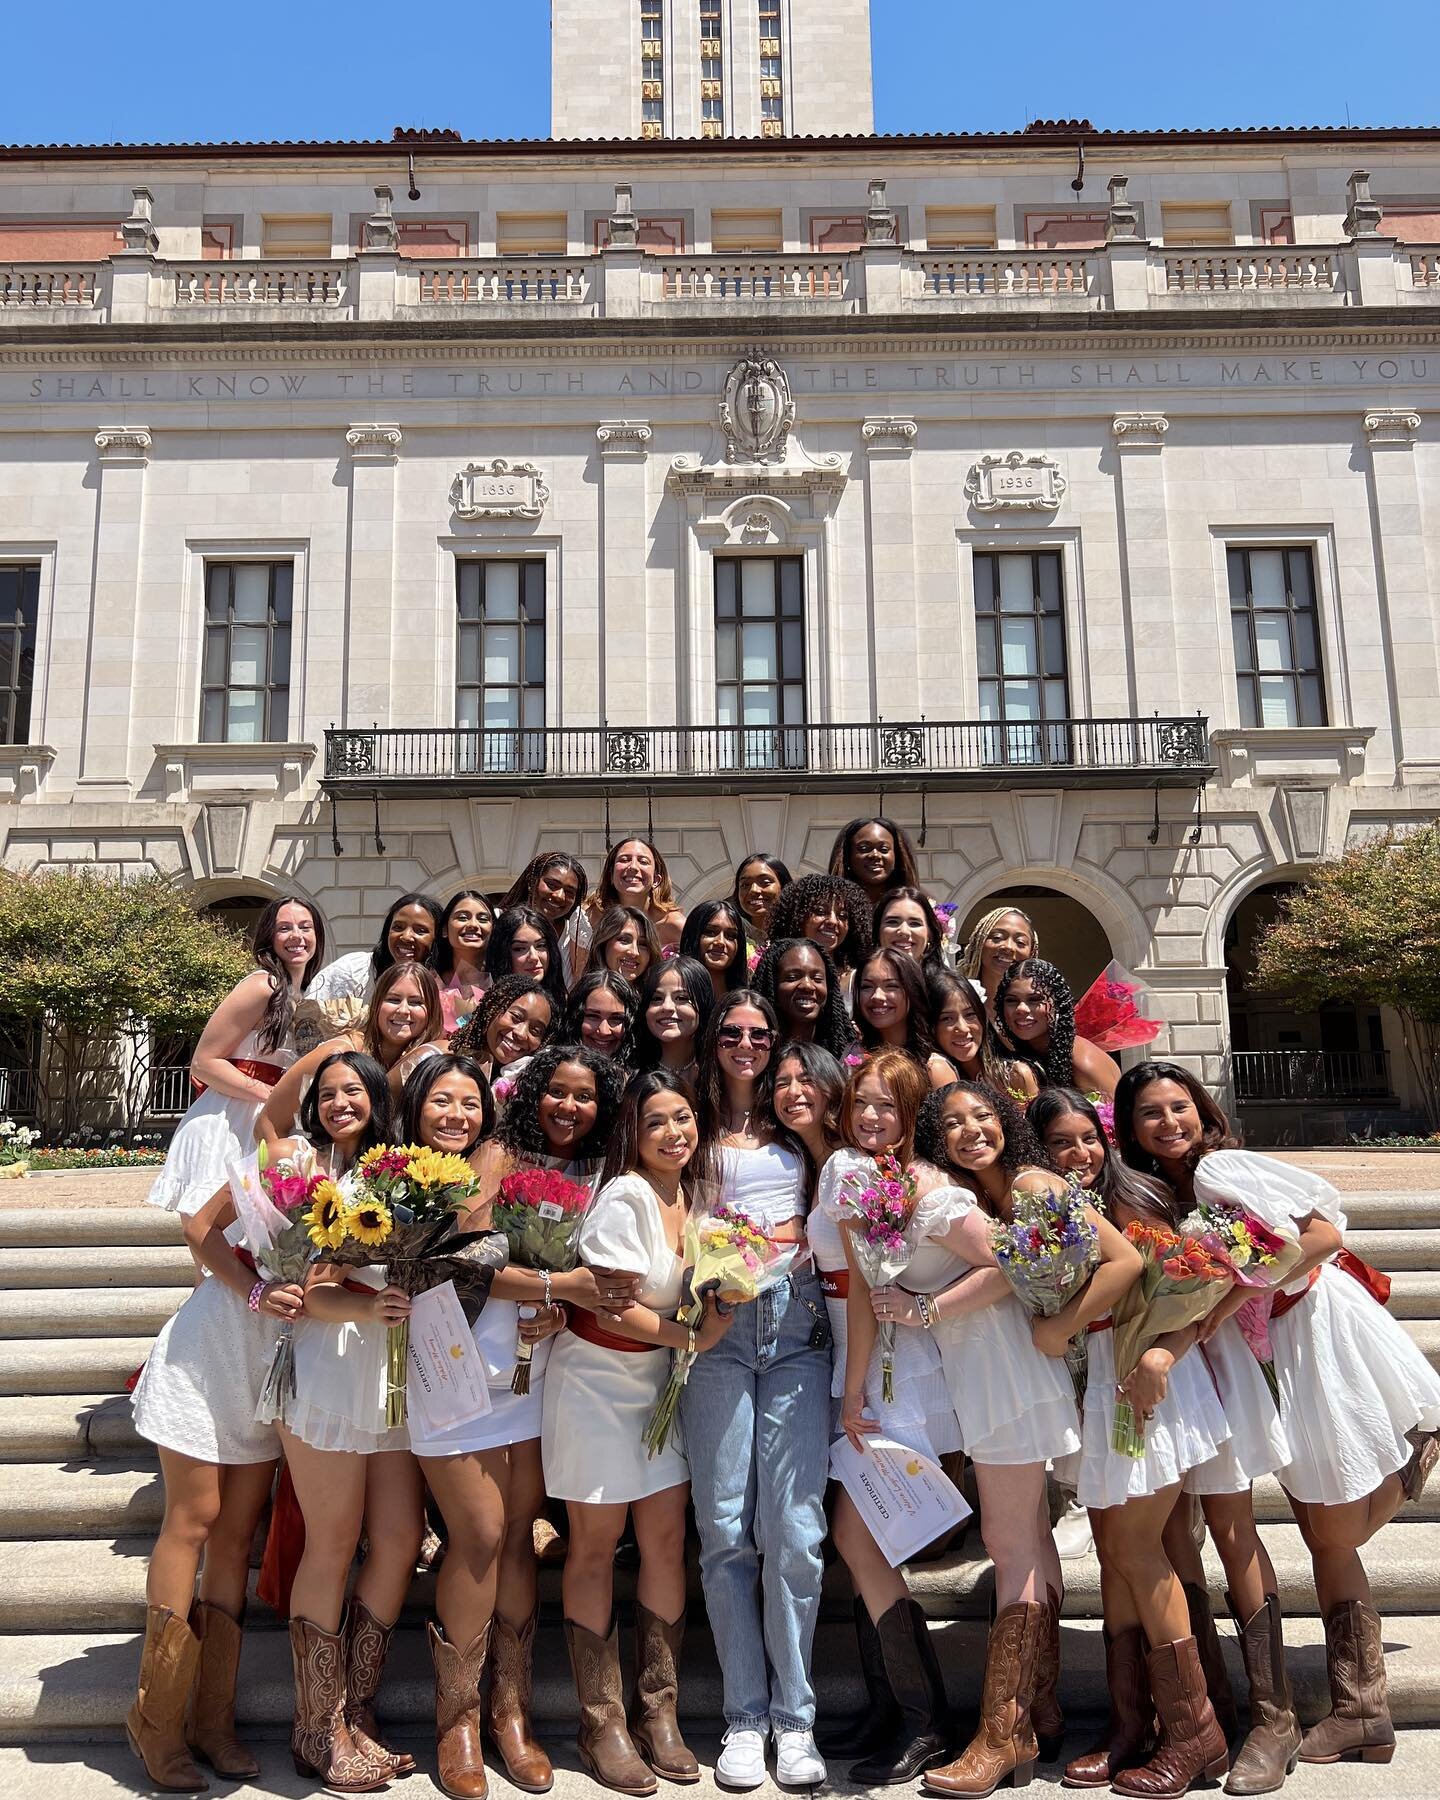 Spring &rsquo;23, you are something special! You all shine so bright and light up every room you walk into. Each one of you is beautiful, intelligent, kind, and fun. As an organization, we are proud of you and grateful you all found your way to Texas